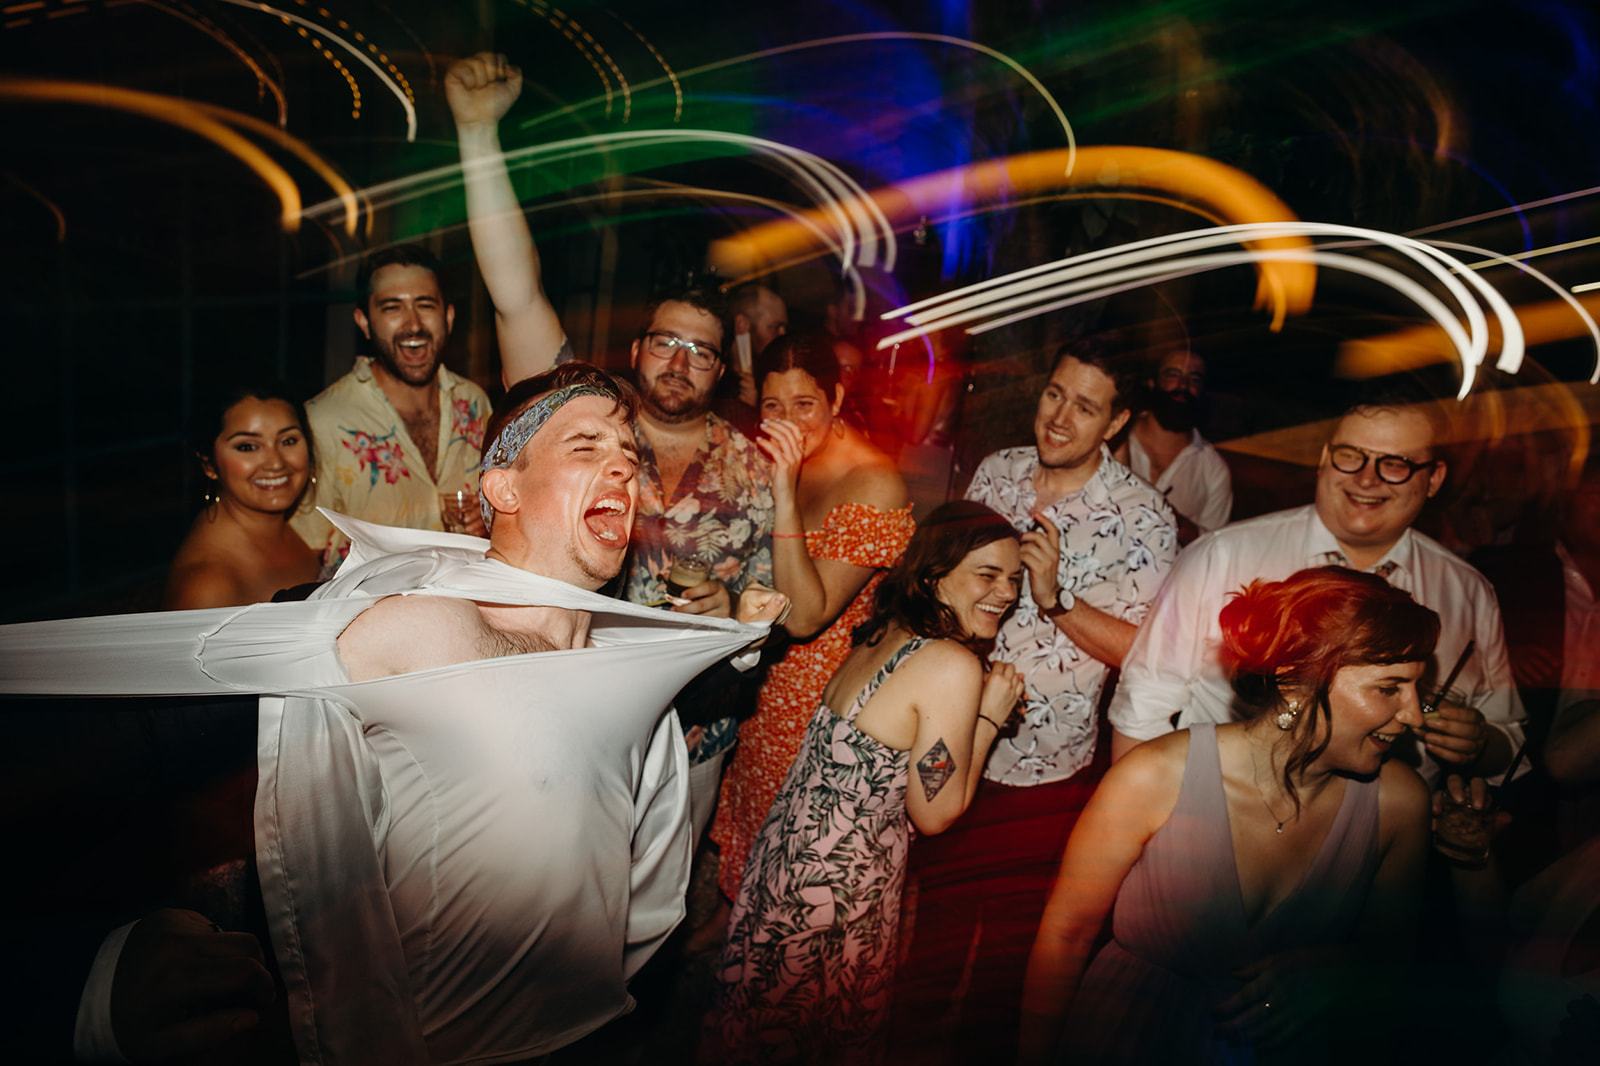 Documentary wedding photograph of joyful people dancing at a party with colourful light streaks in the background.